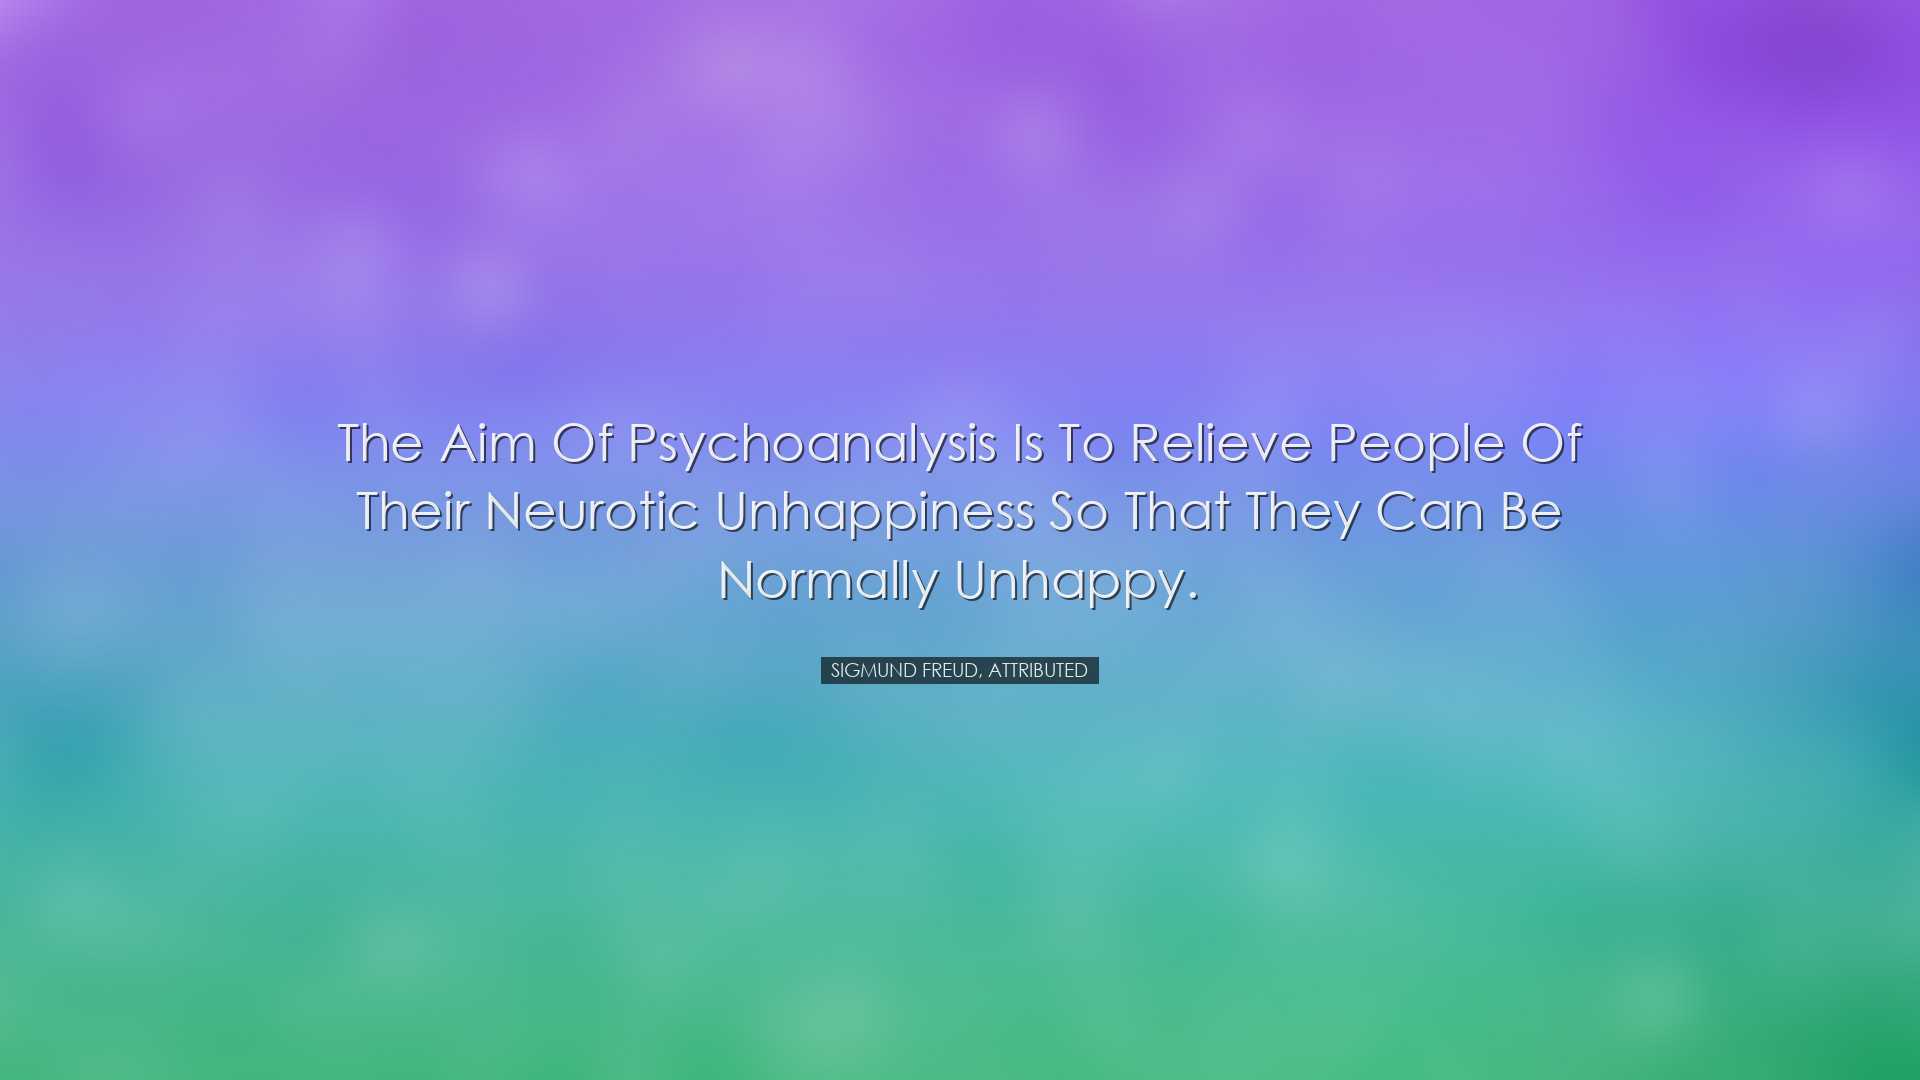 The aim of psychoanalysis is to relieve people of their neurotic u